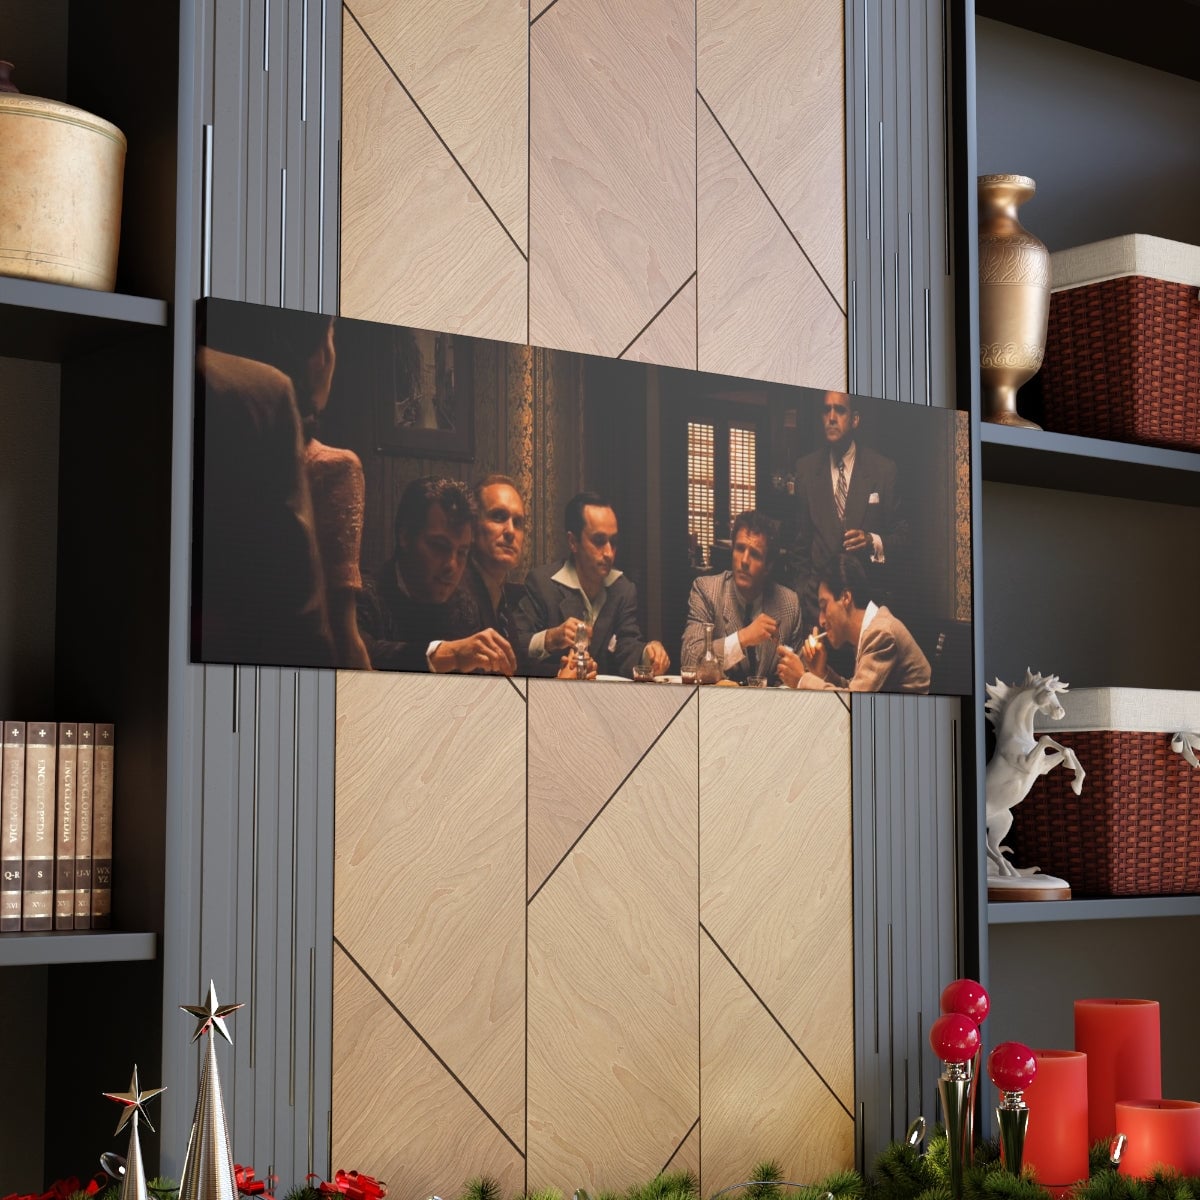 The Best Mobster Movie of All Time Canvas Gallery Wraps